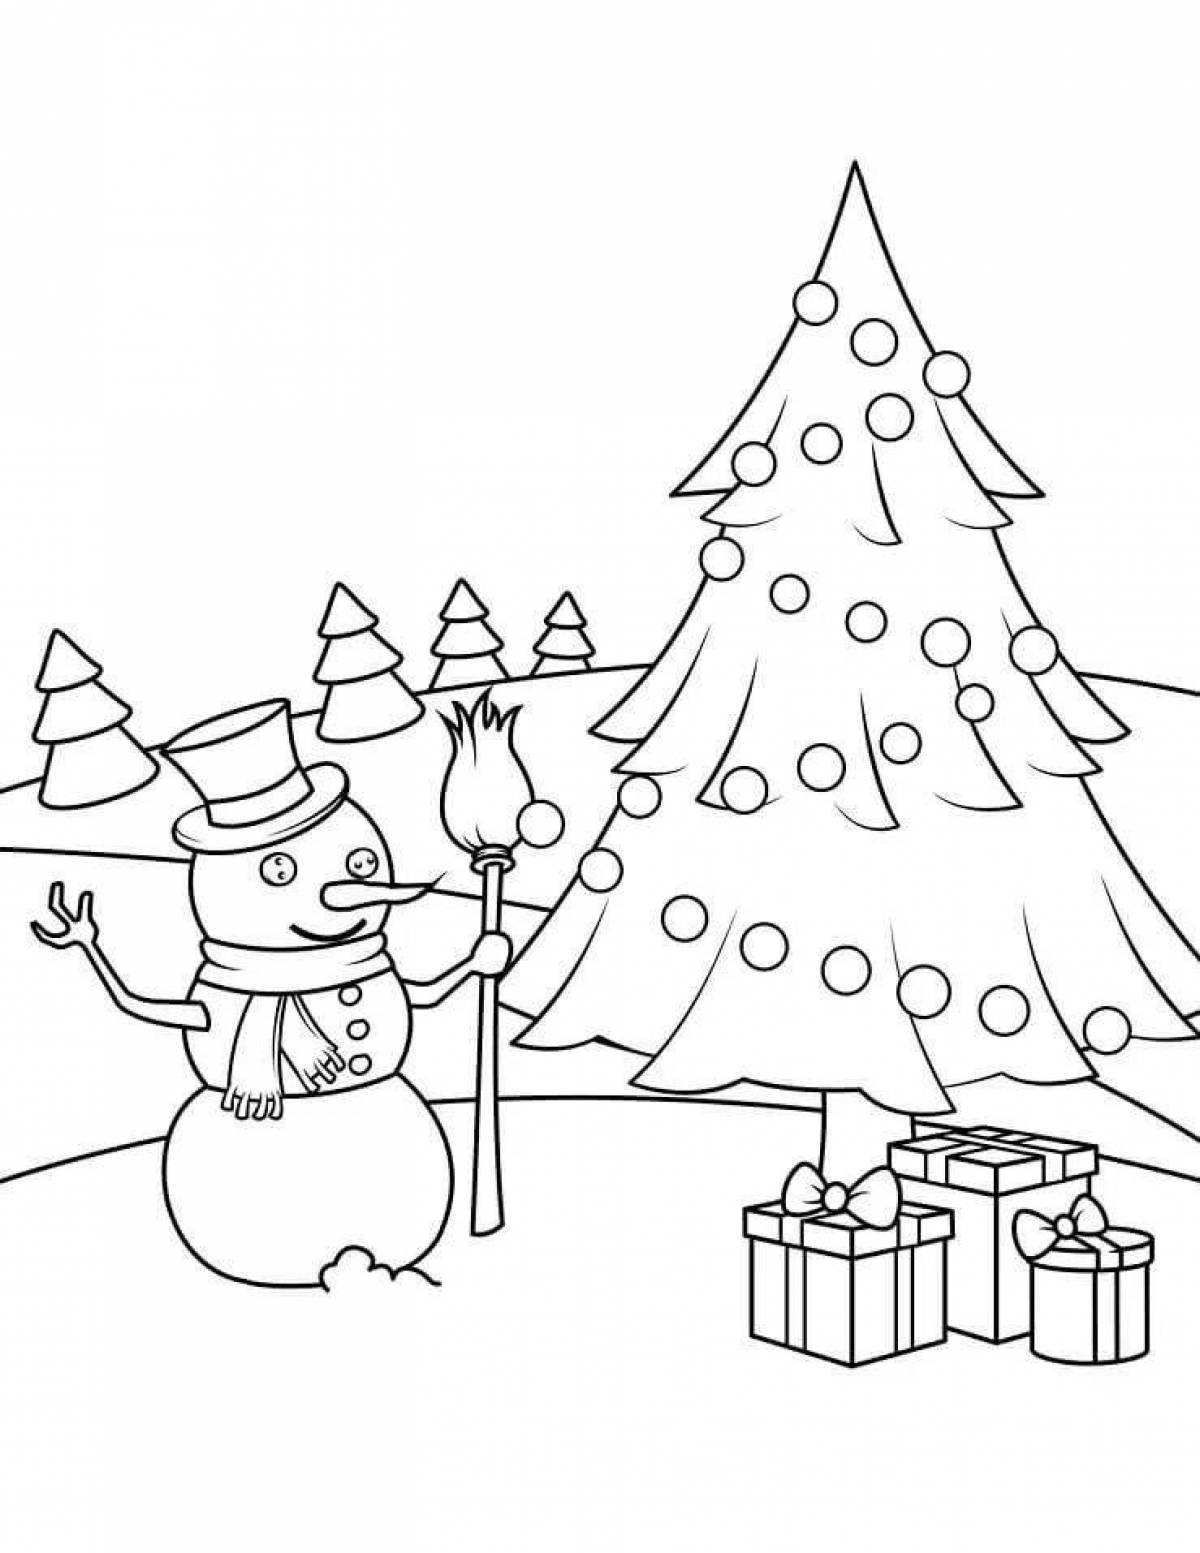 Snowman coloring page